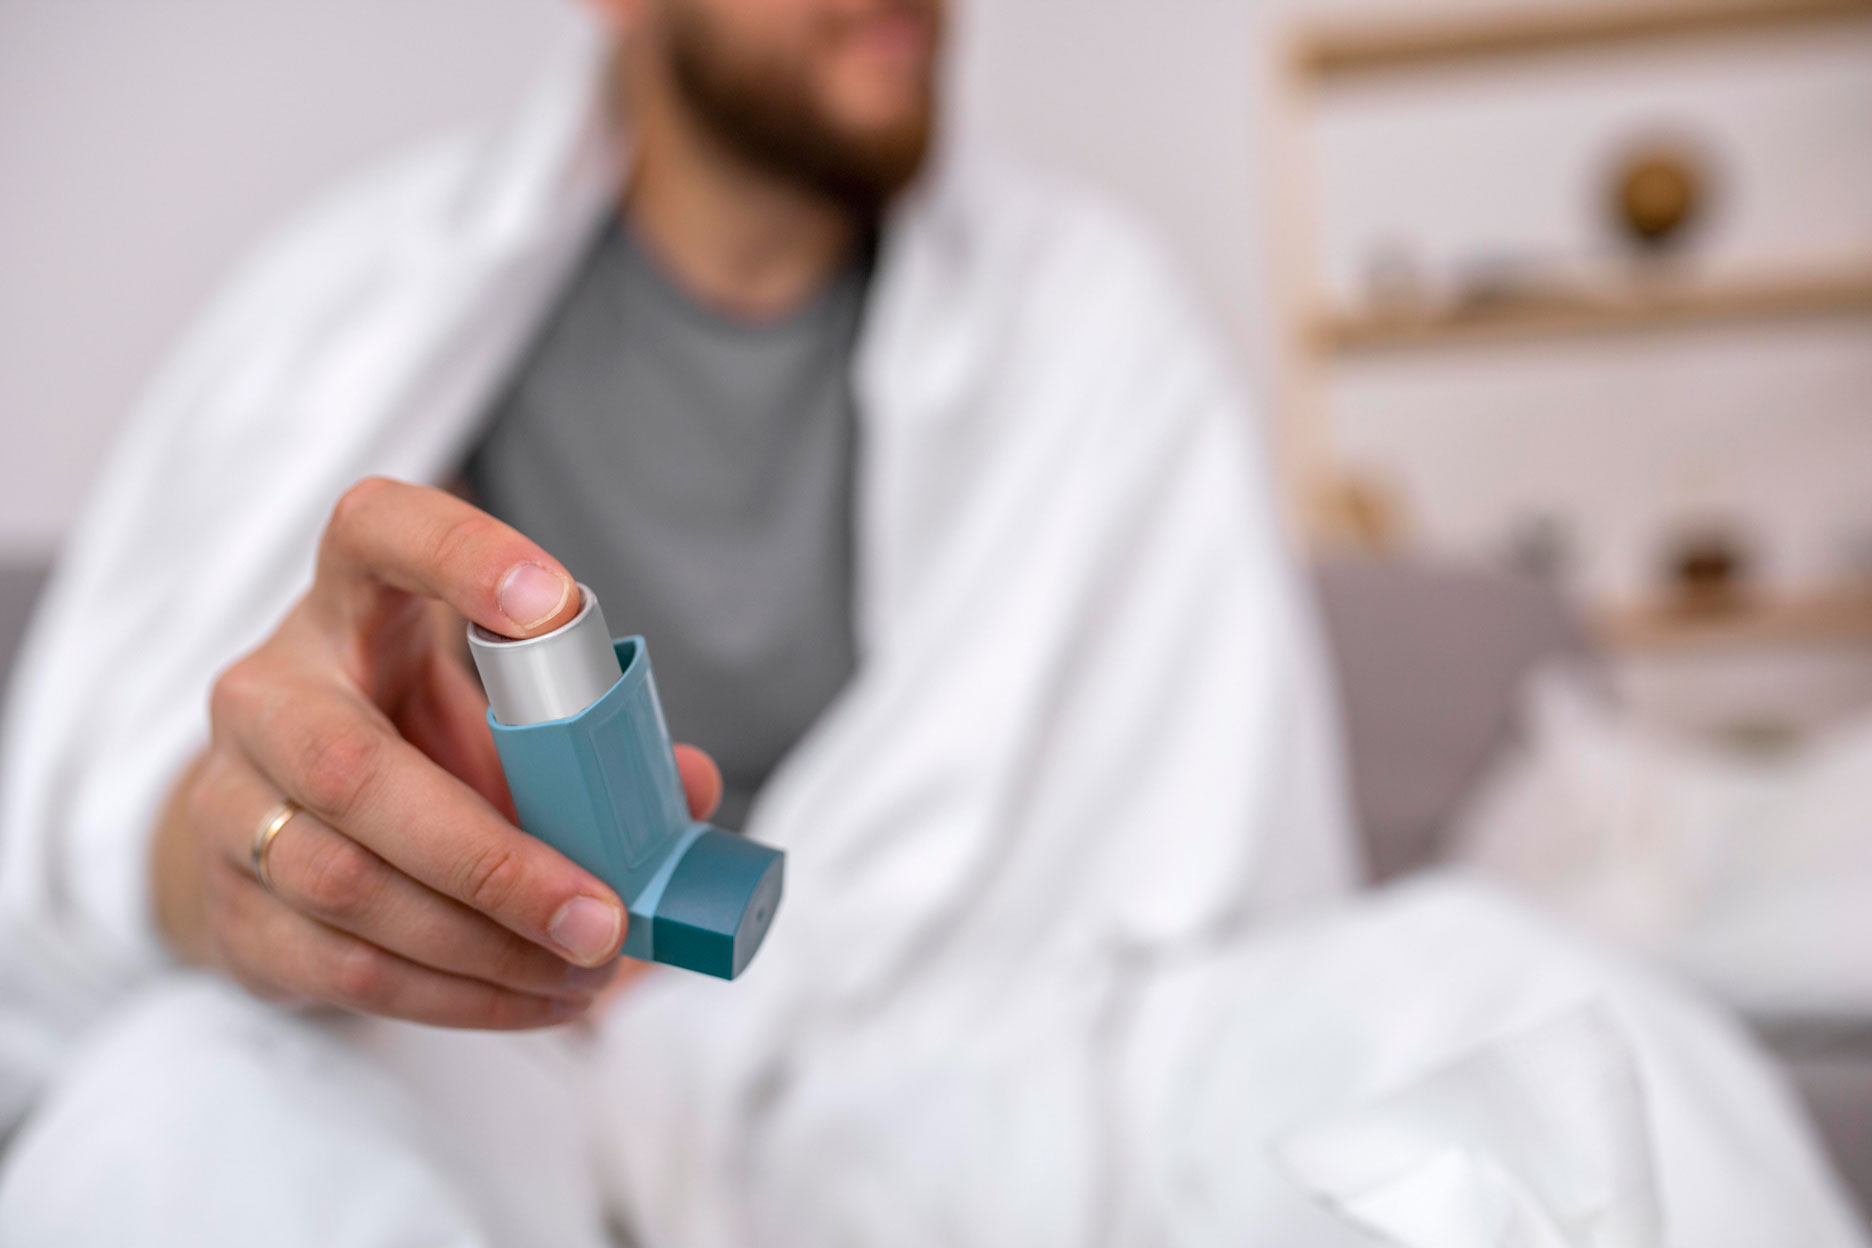 Treatment  of Exercise-induced asthma 

